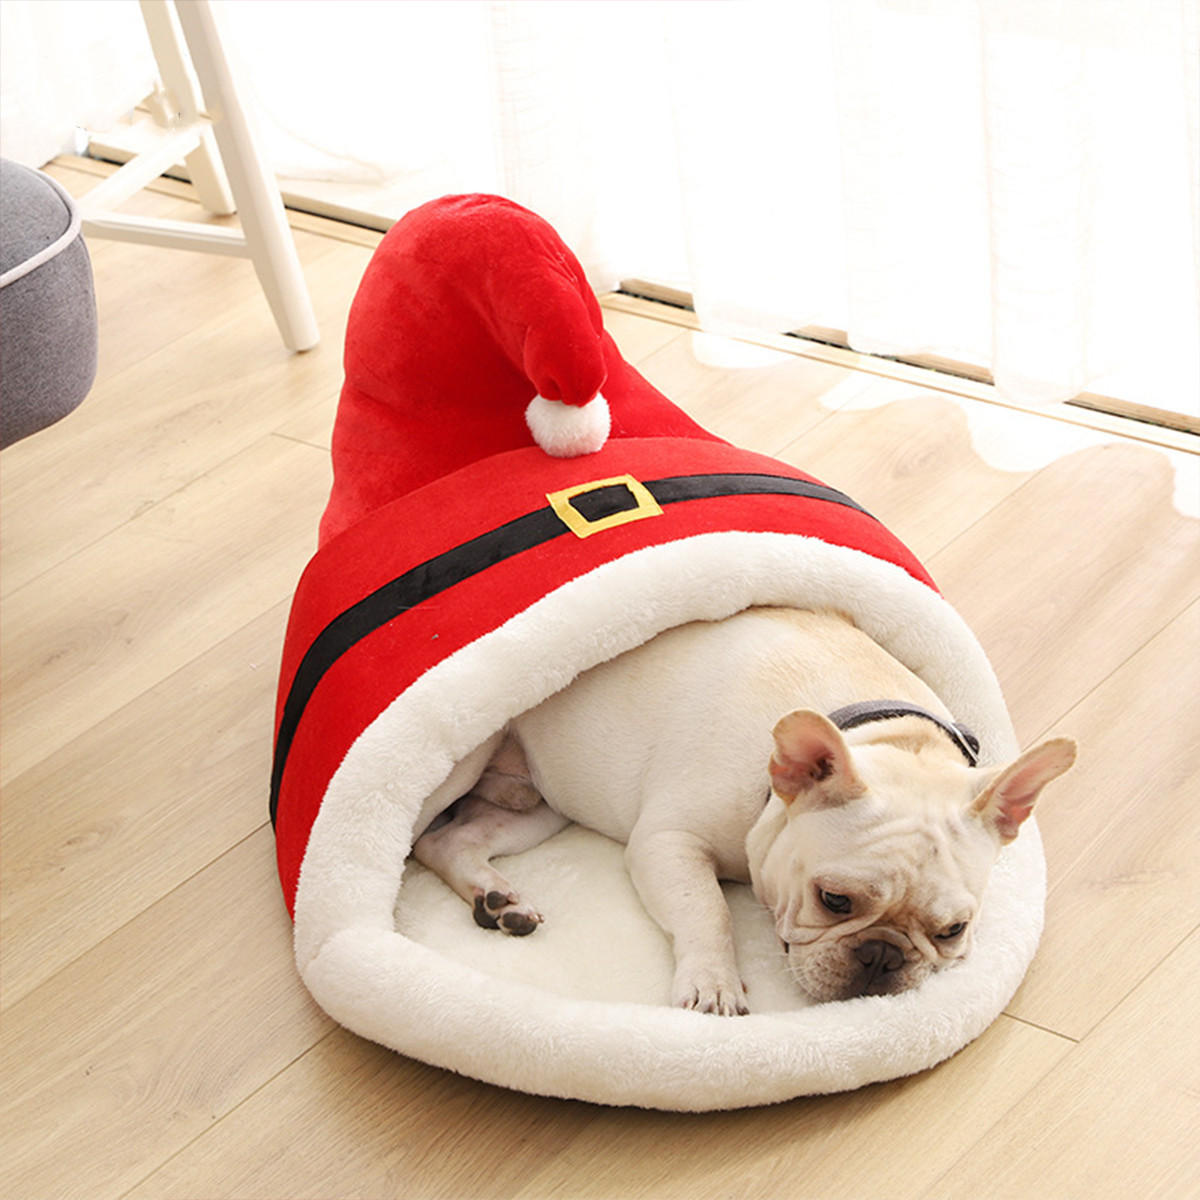 60x43x35cm Christmas Cartoon Pet Bed Red Slipper Type Thick Winter Warm Bed for Cats Dog Pet-heyidear